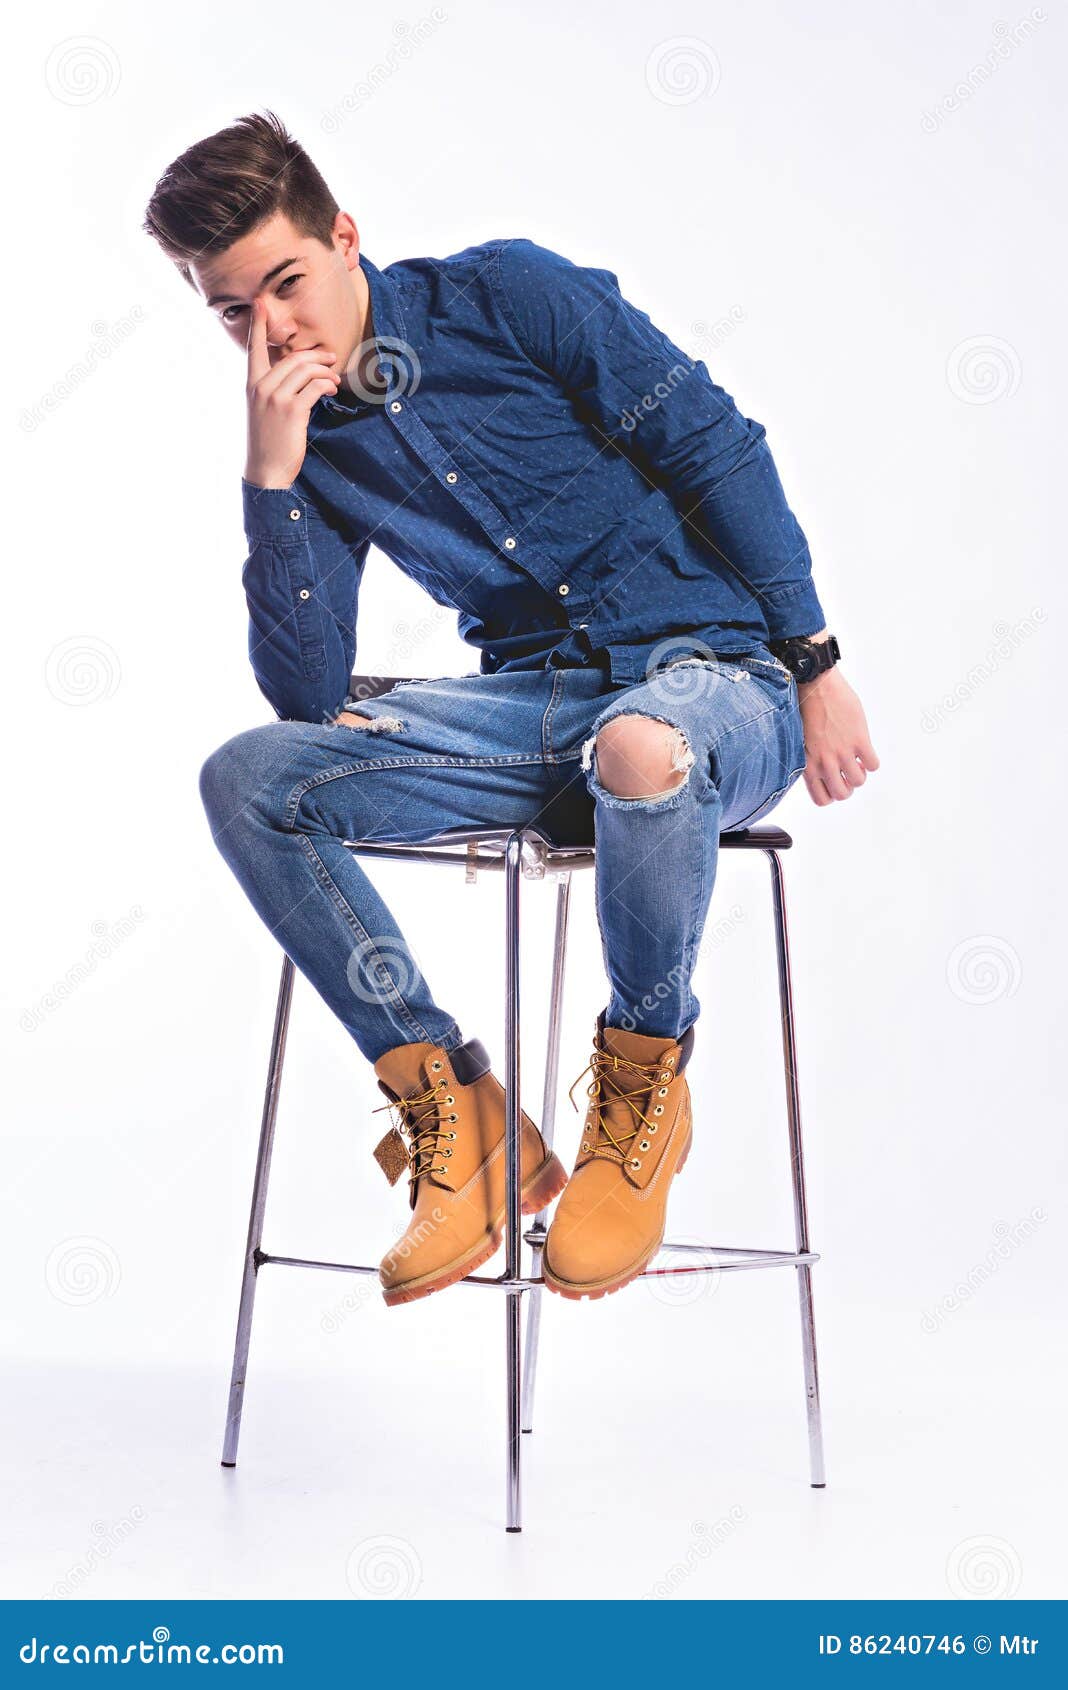 Male Model In Denim Jeans And Boots Stock Photo Image Of Clothing Accessories